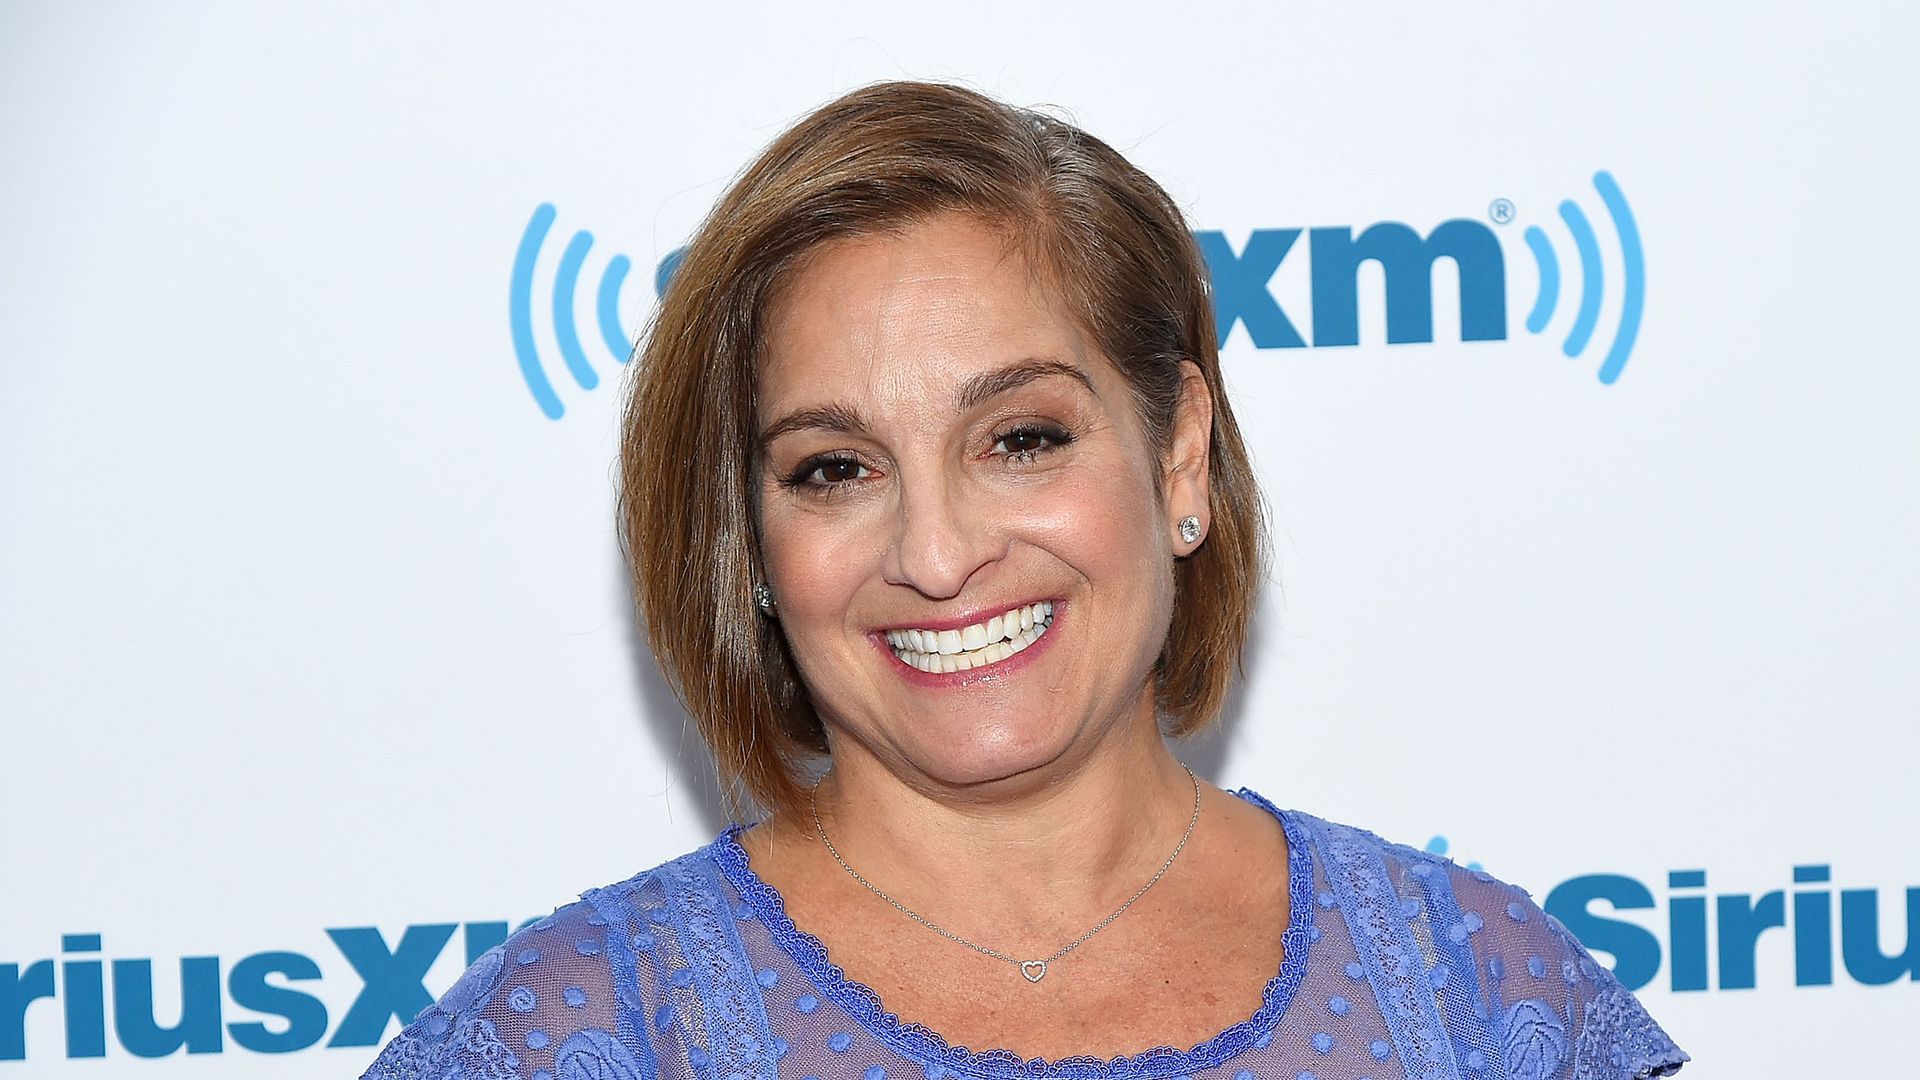 Gymnast Mary Lou Retton visits at SiriusXM Studio on August 9, 2016 in New York City.